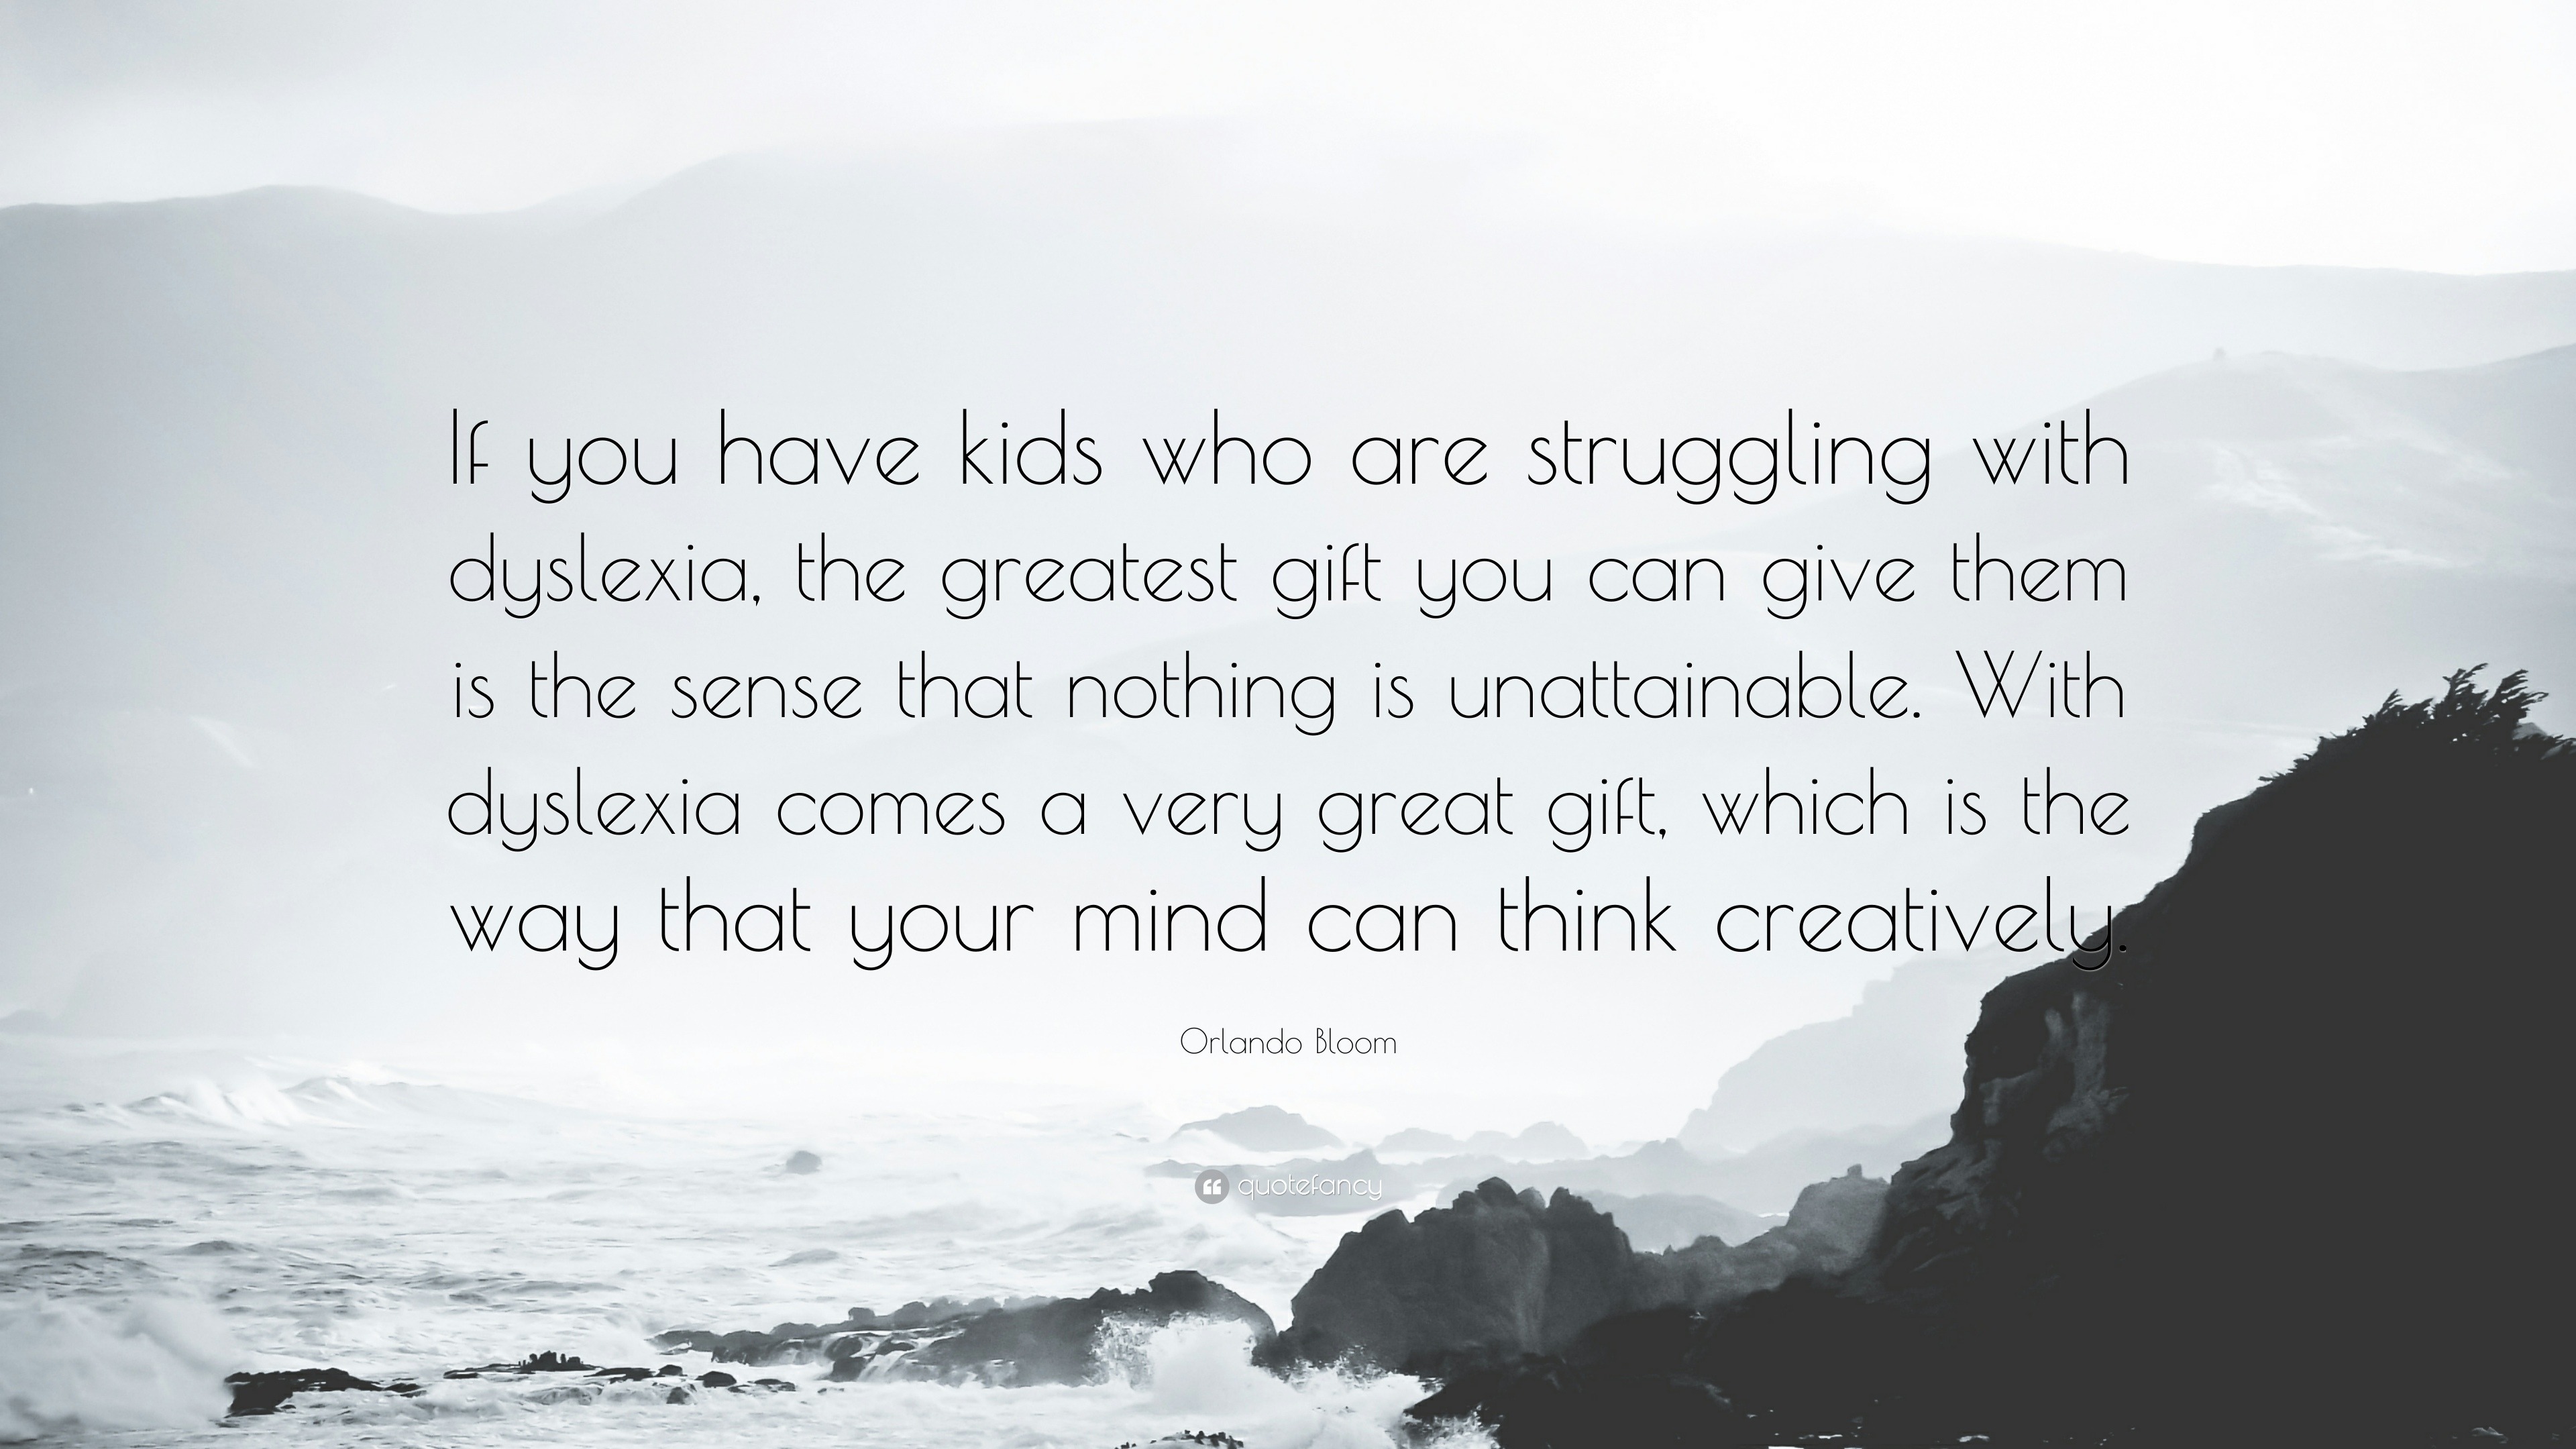 Orlando Bloom Quote: “If you have kids who are struggling with dyslexia